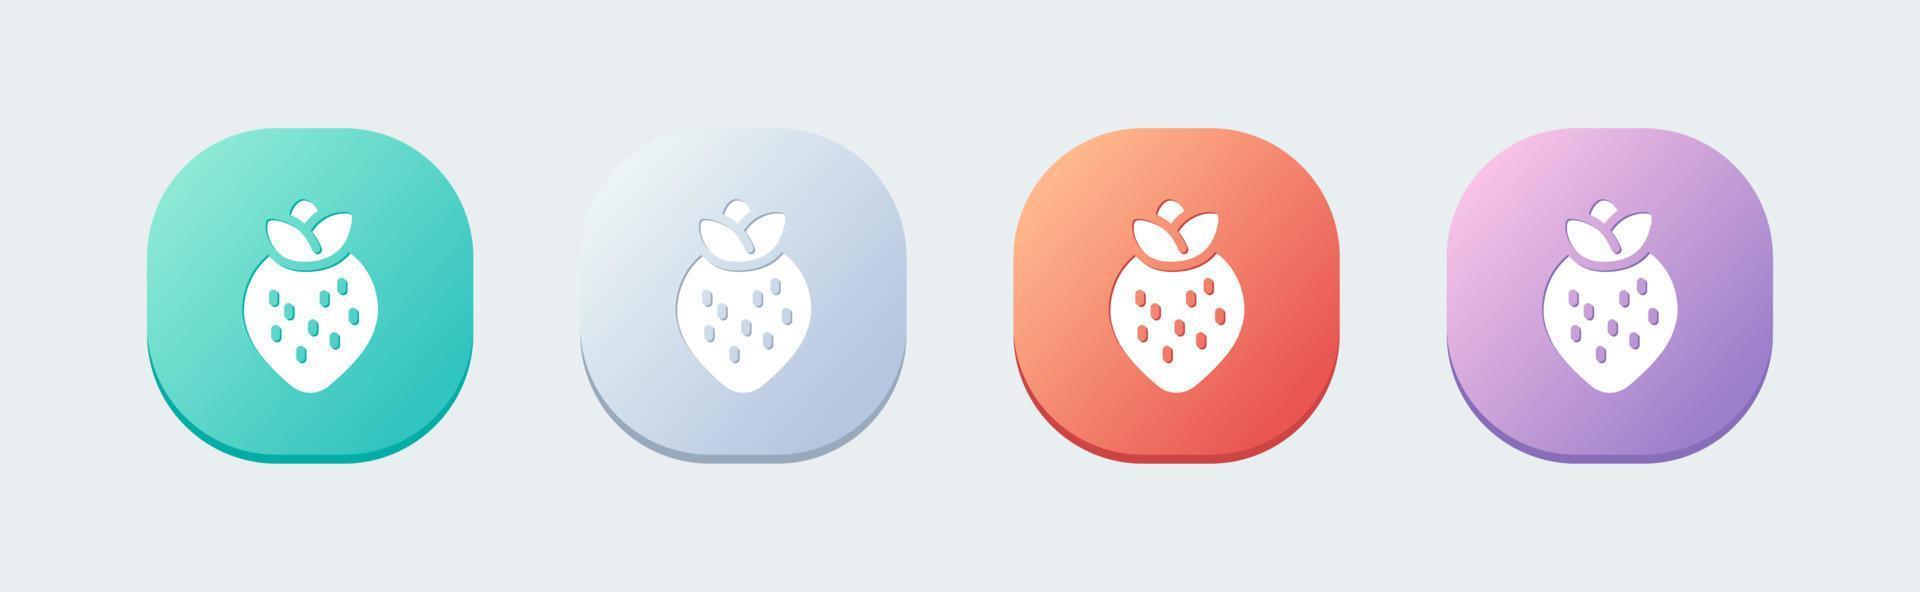 Strawberry solid icon in flat design style. Fruit signs vector illustration.